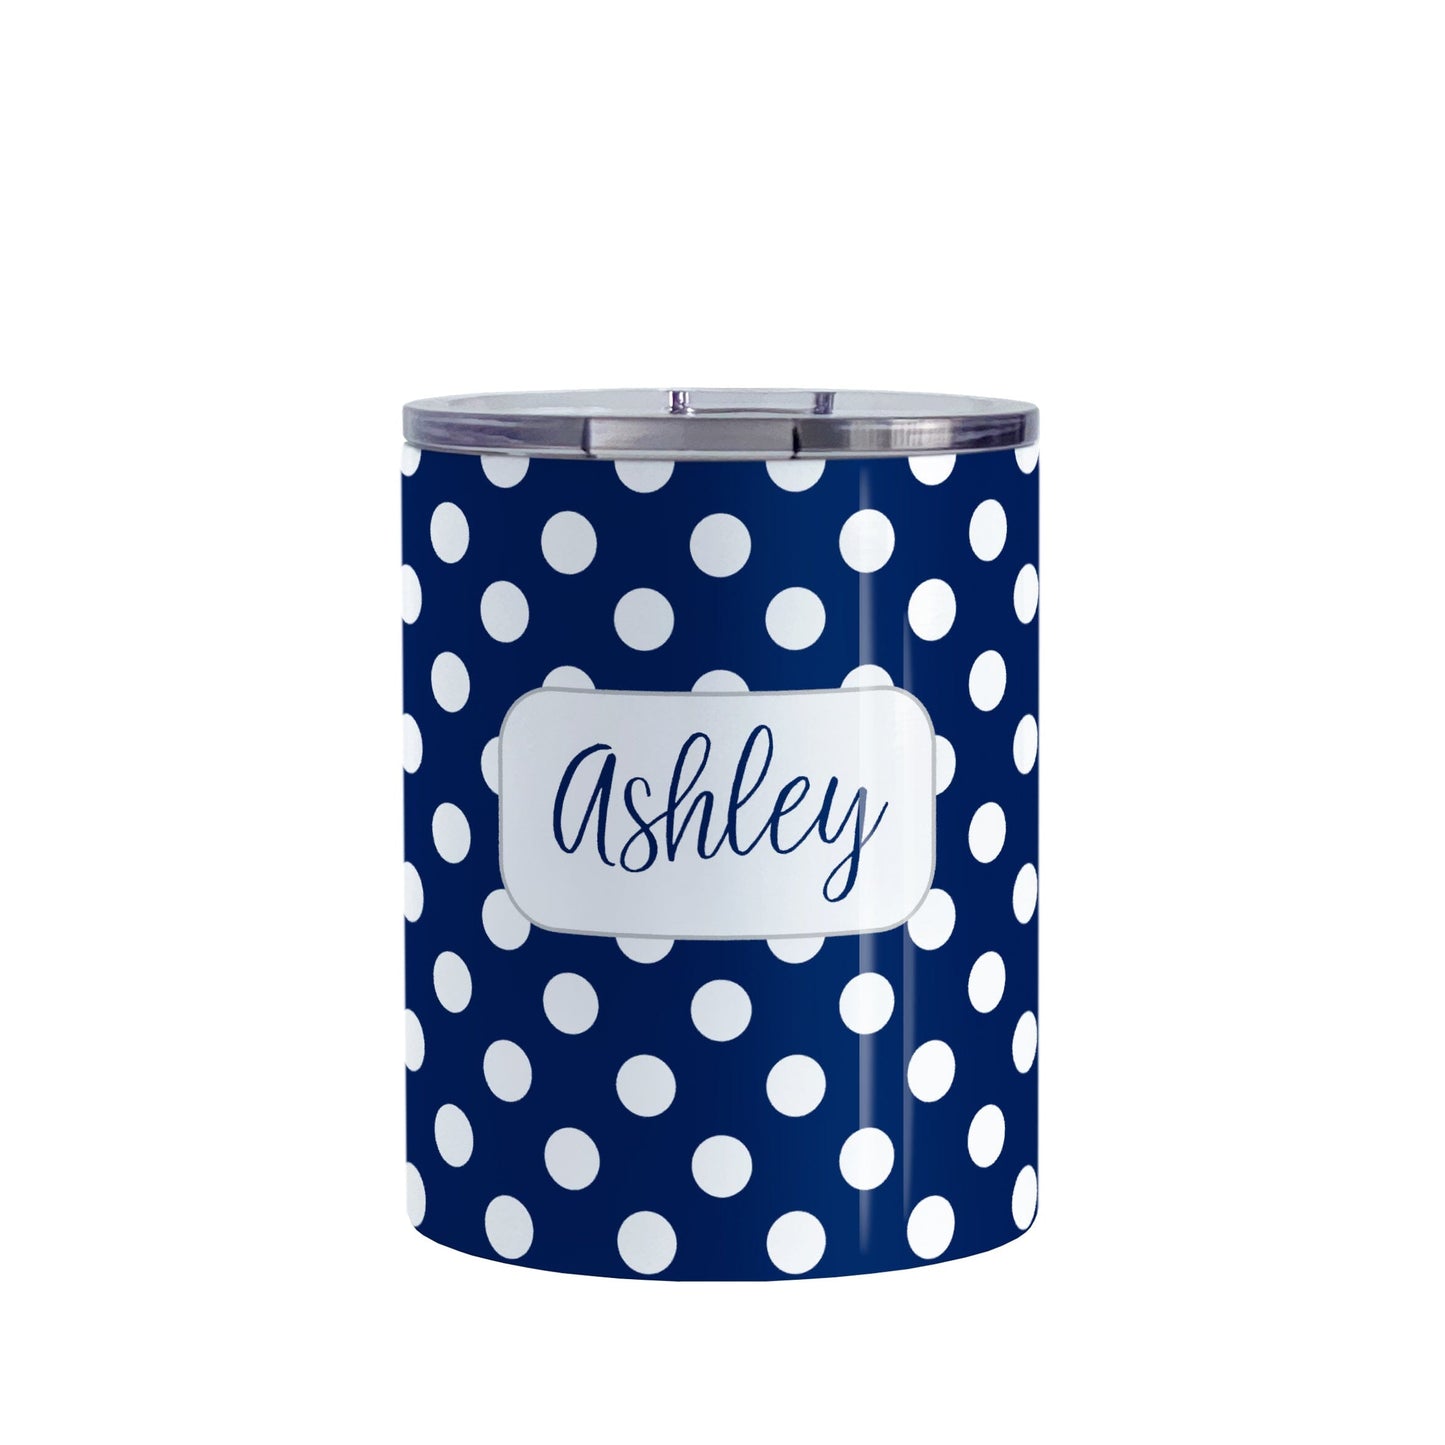 Personalized Dark Blue Polka Dot Tumbler Cup (10oz, stainless steel insulated) at Amy's Coffee Mugs. This cup is designed with a pattern of white polka dots over a dark navy blue background color that wraps around the cup. Your name is personalized in a dark blue script font over the polka dot pattern.